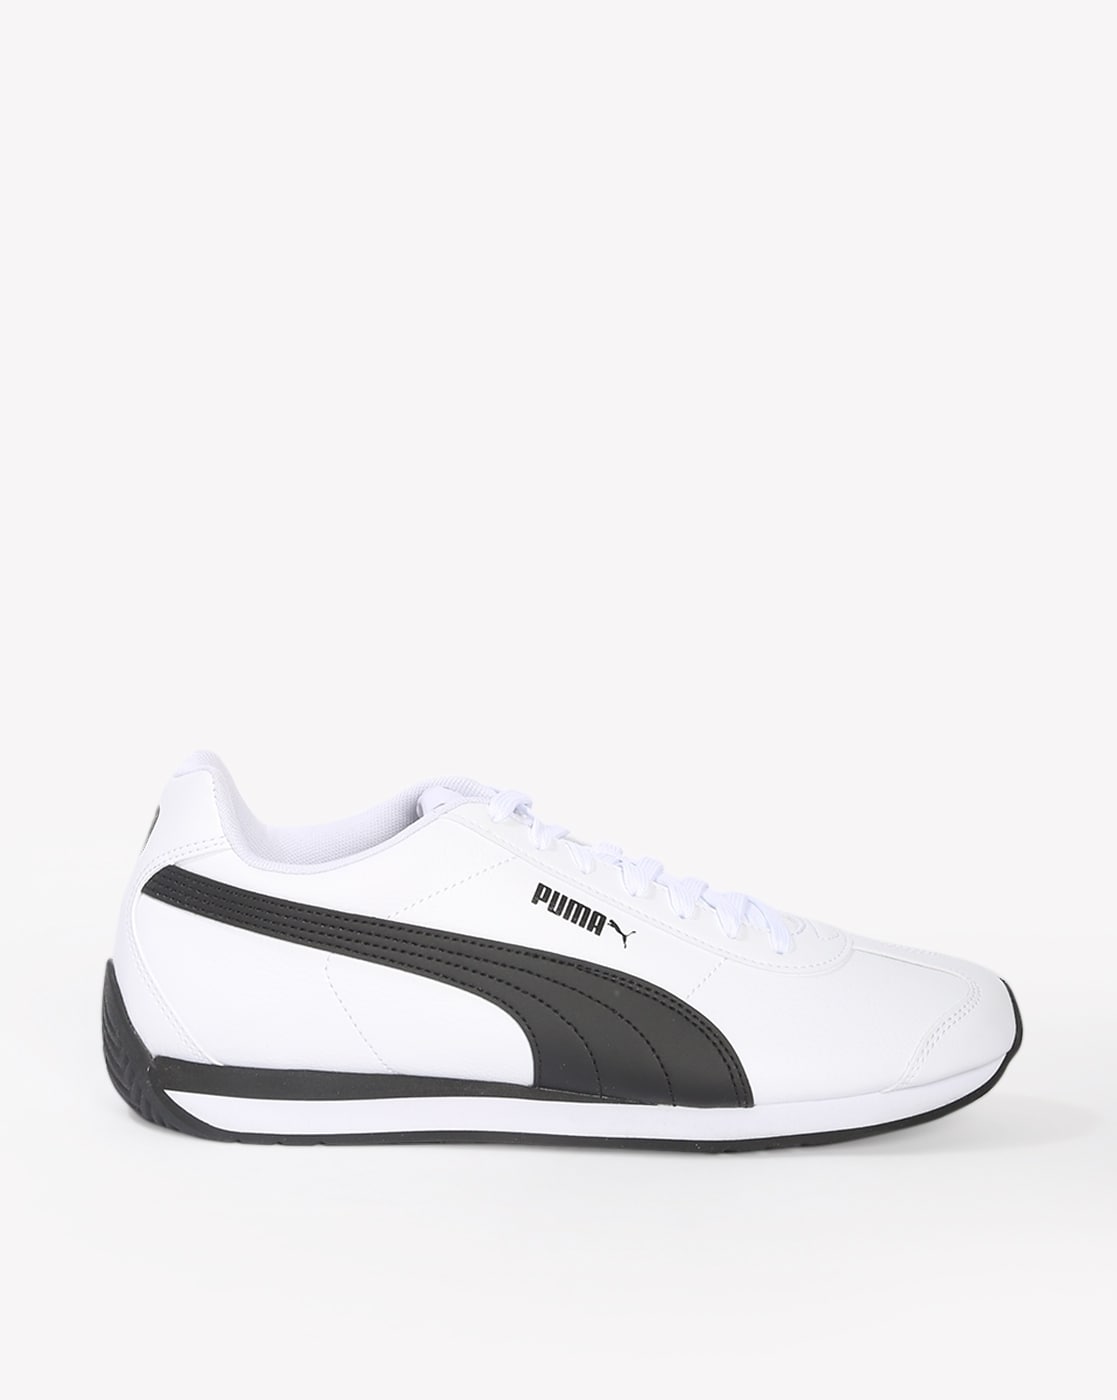 PUMA Turin Sneakers for Men for Sale | Authenticity Guaranteed | eBay